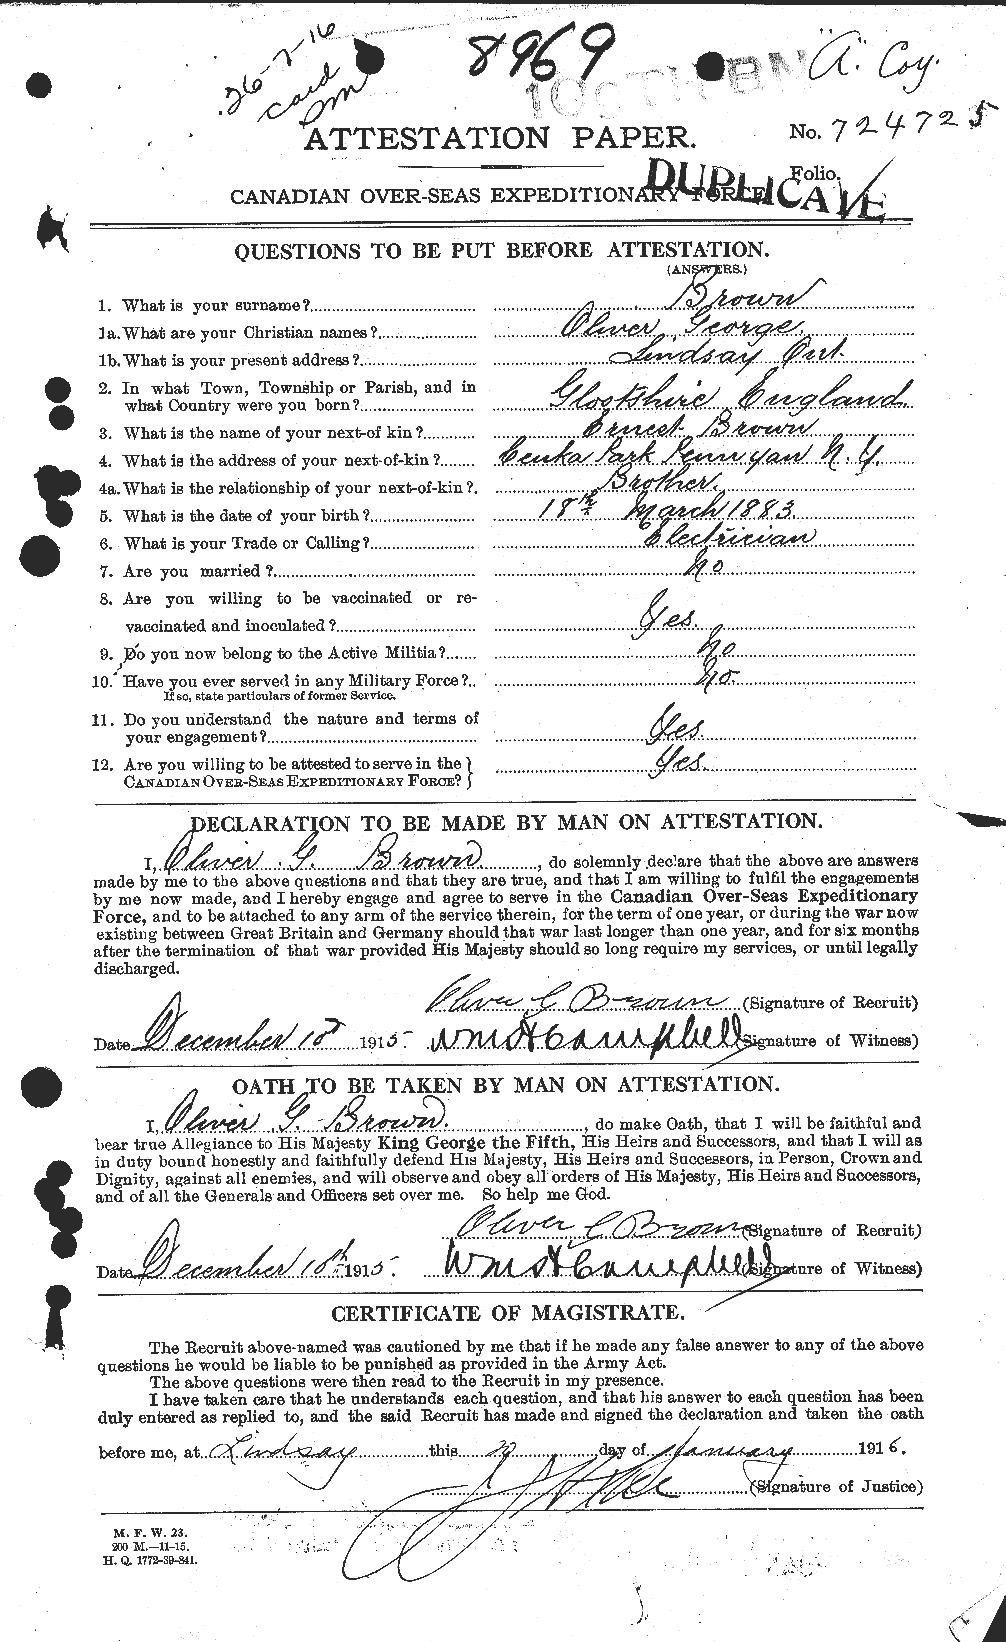 Personnel Records of the First World War - CEF 267126a